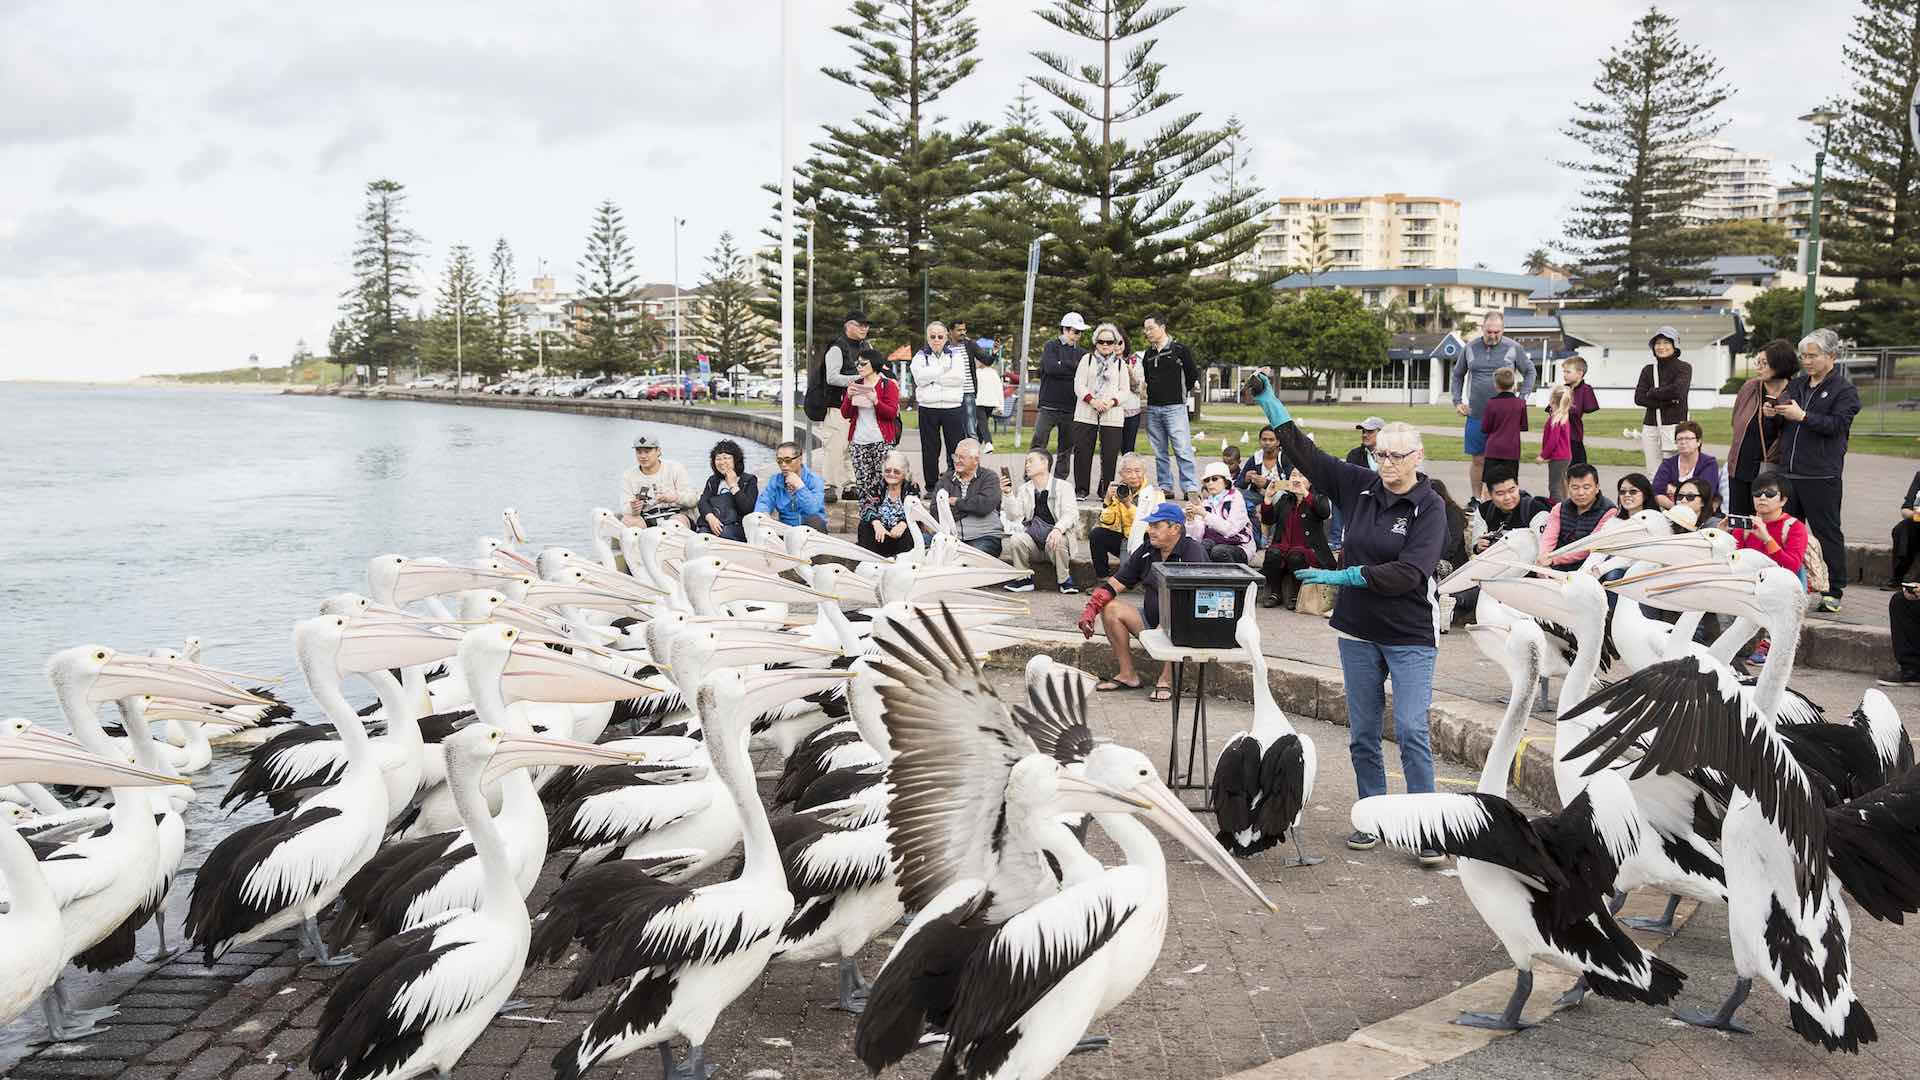 Tourists watching the popular daily pelican feeding at The Entrance on the NSW Central Coast